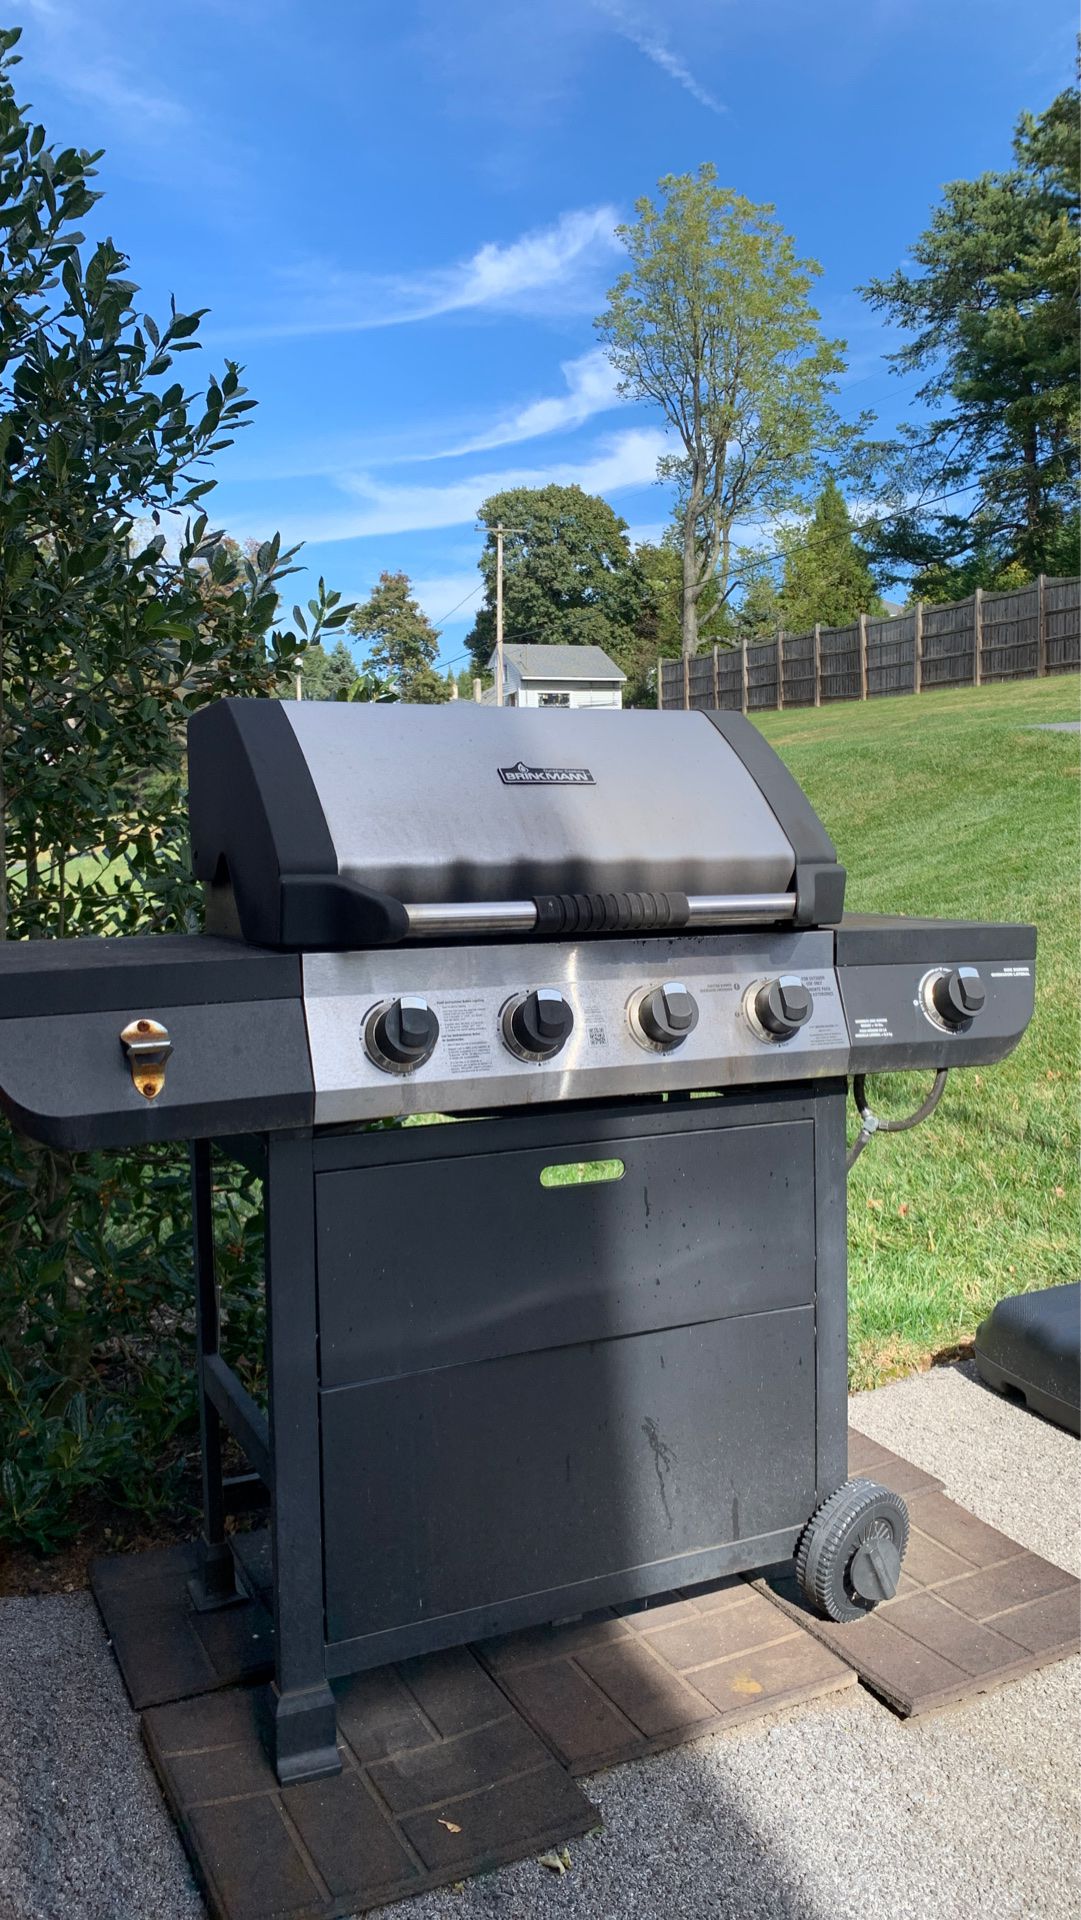 FREE Working BBQ - needs new parts, but works great!